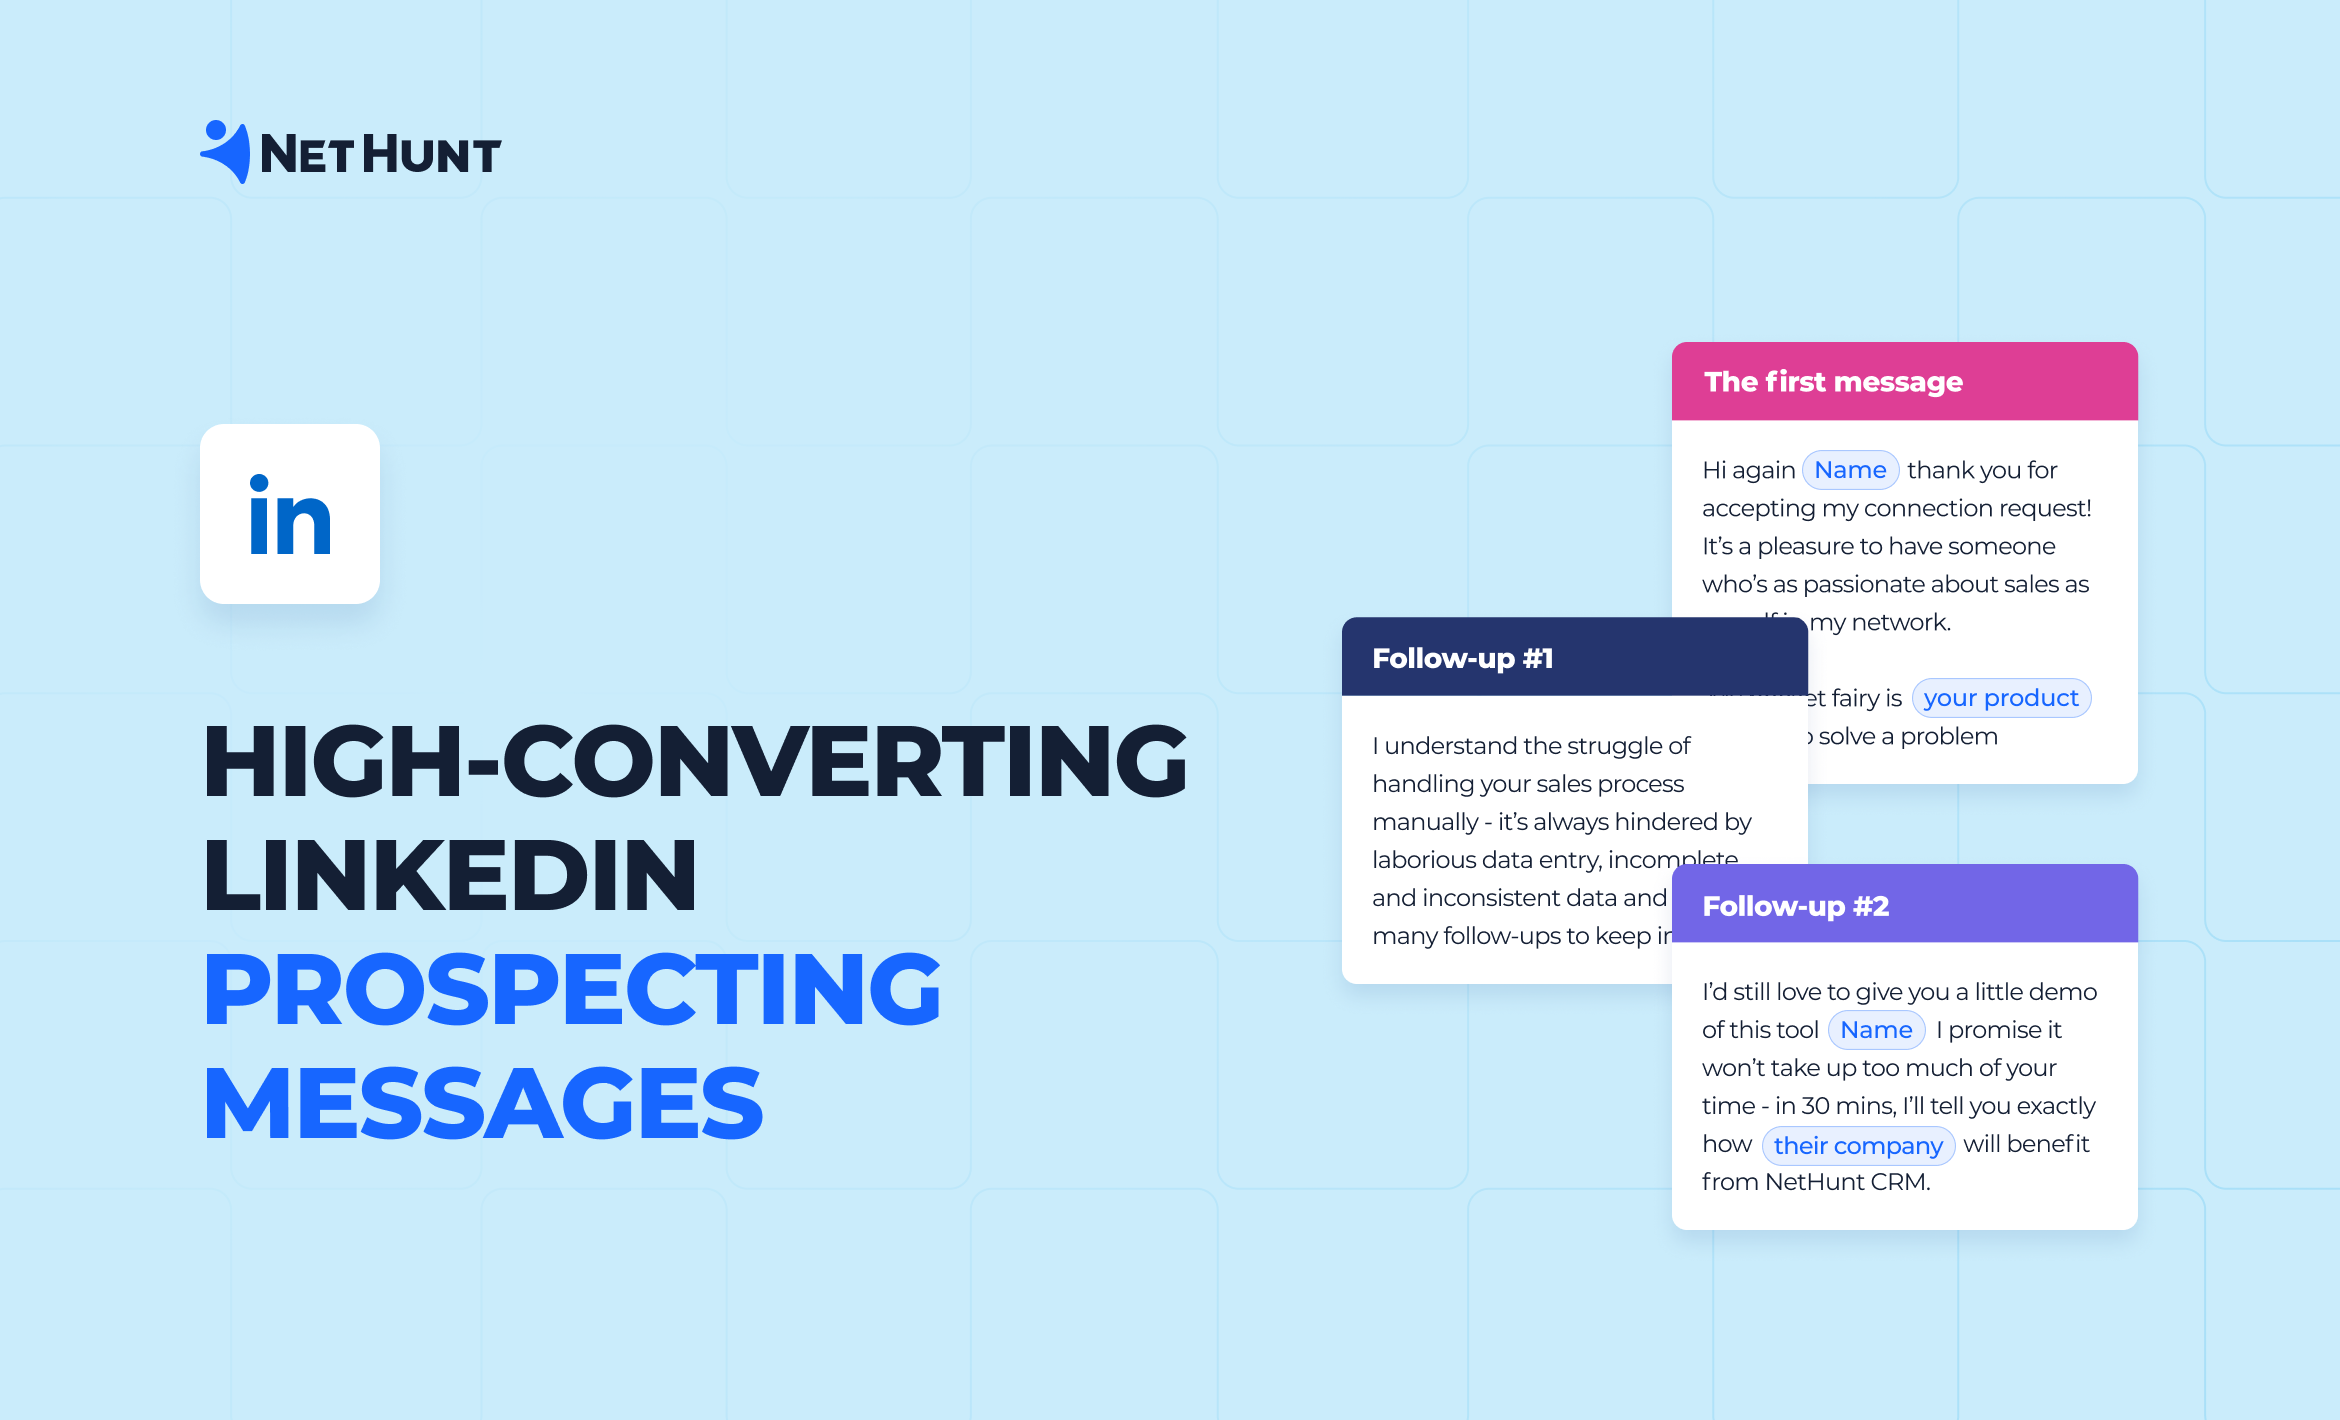 How to write high-converting LinkedIn prospecting messages [with 28 templates]